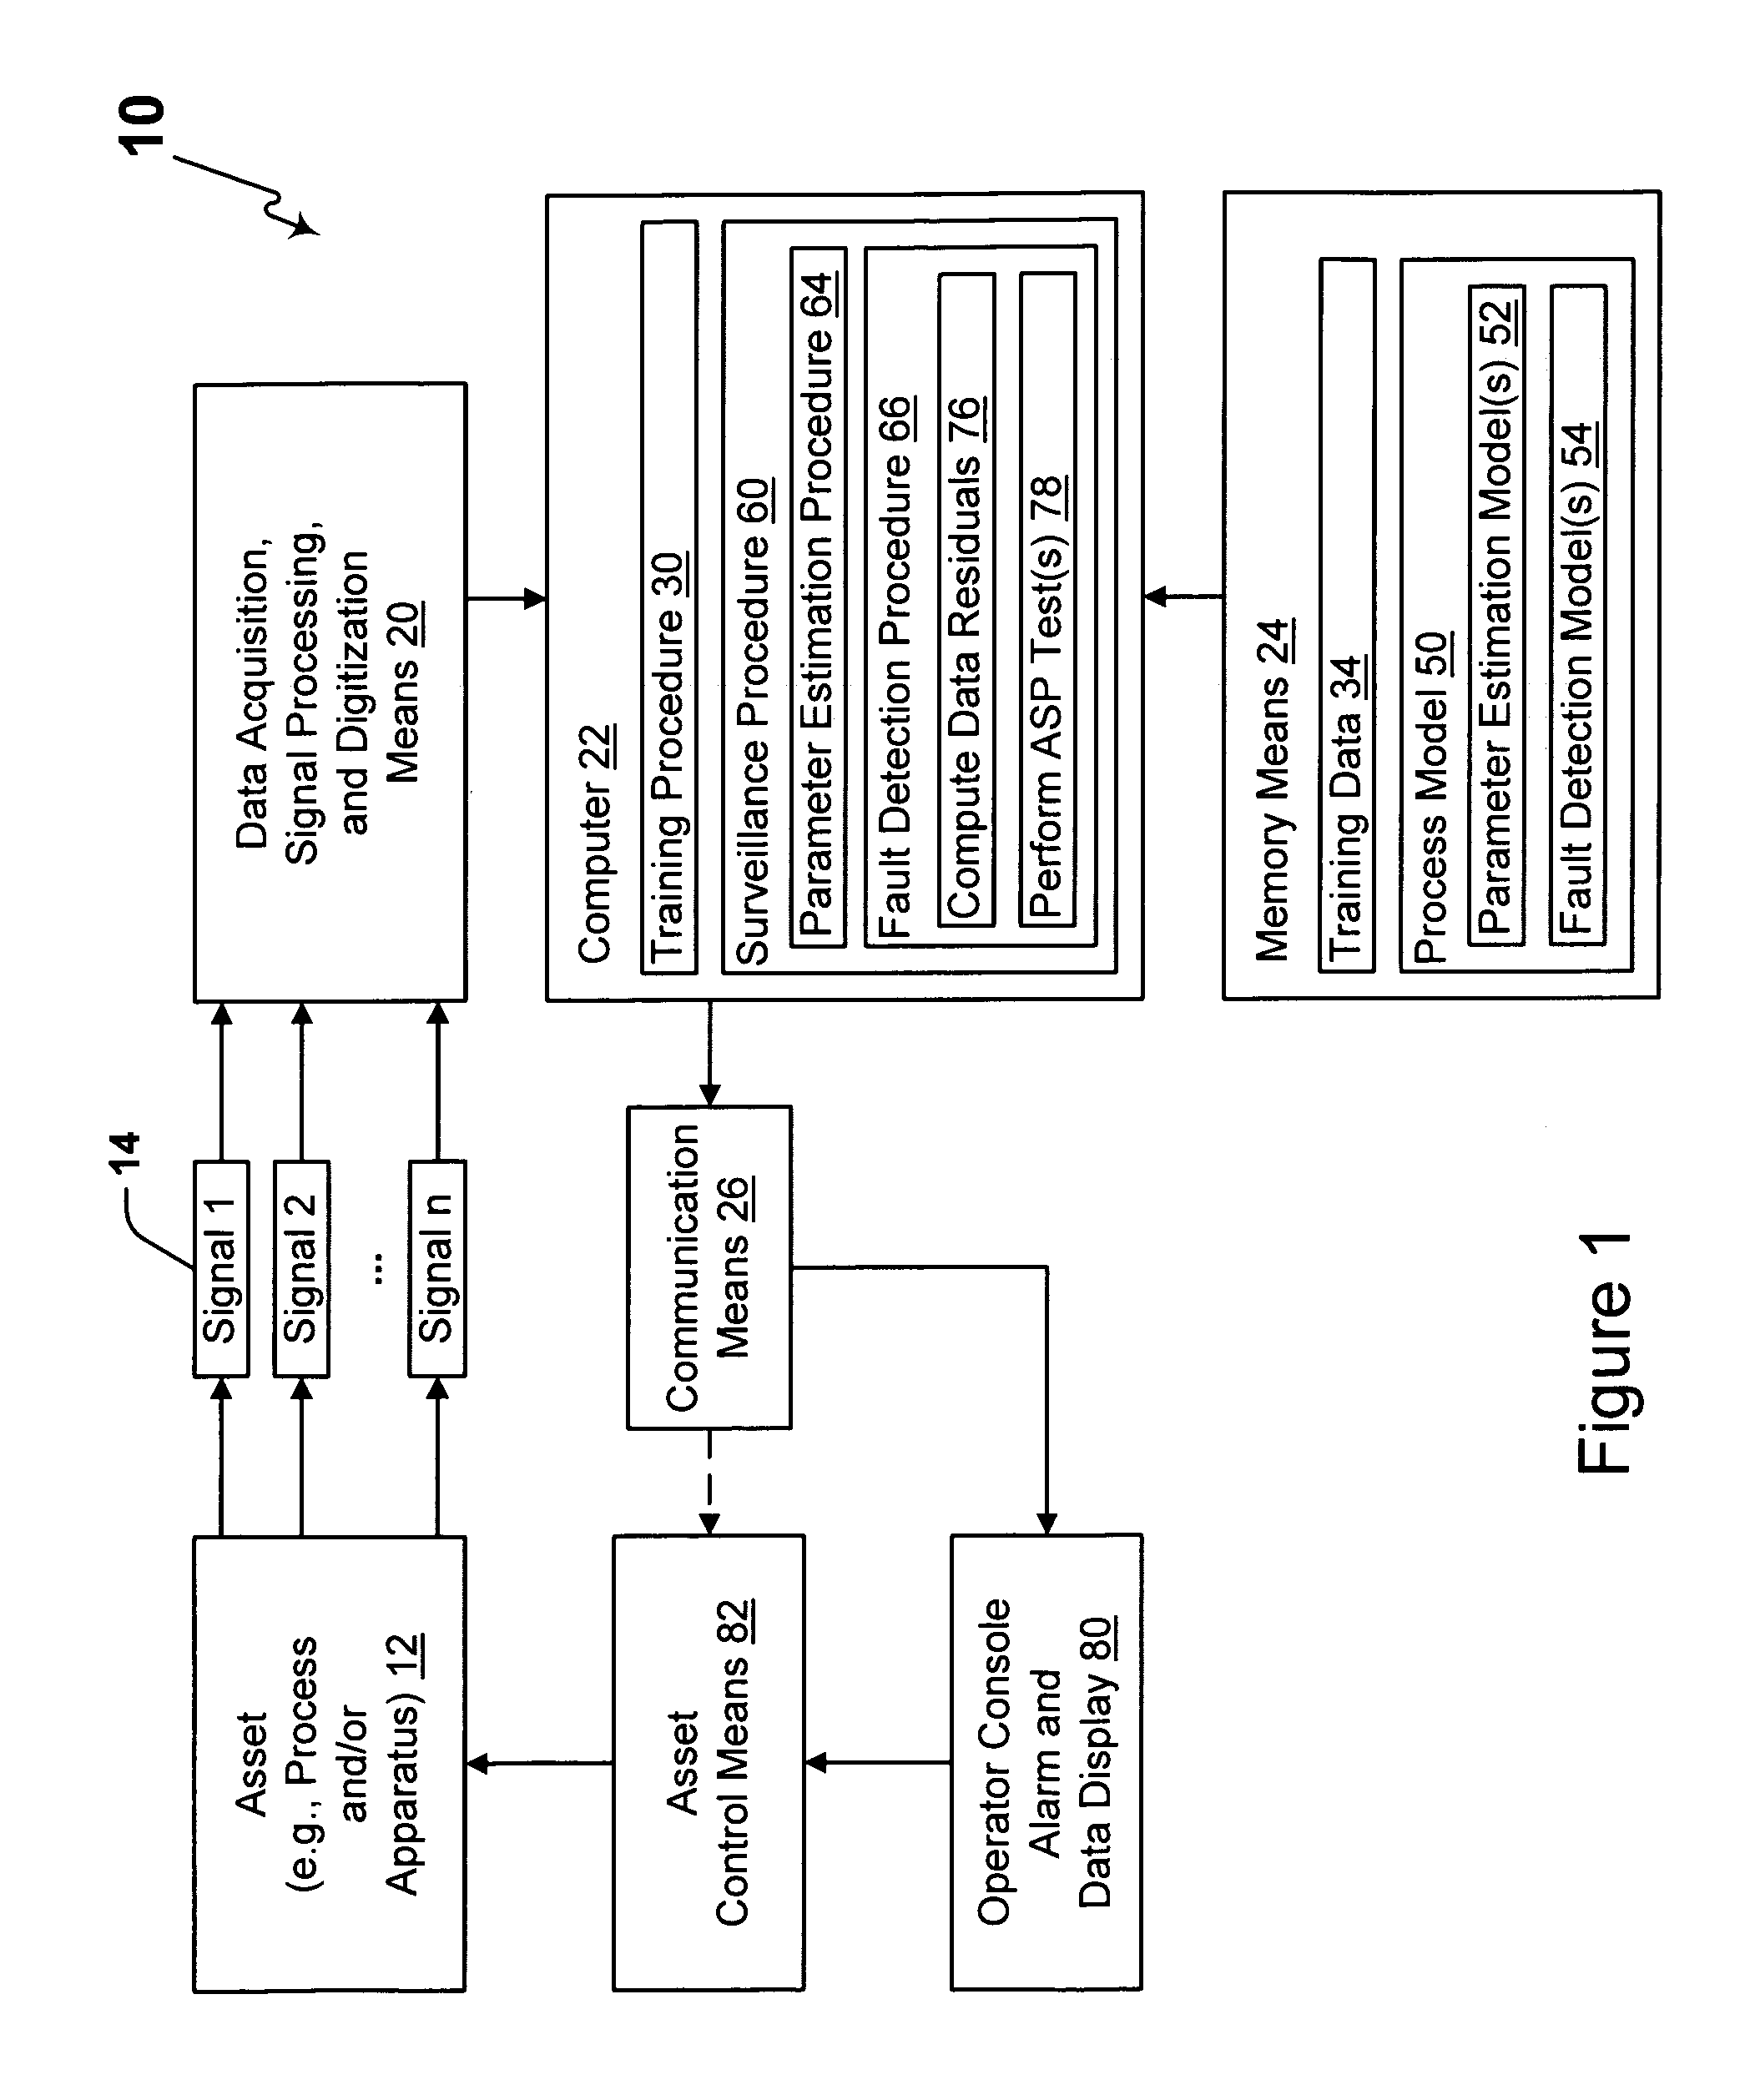 Surveillance system and method having an adaptive sequential probability fault detection test